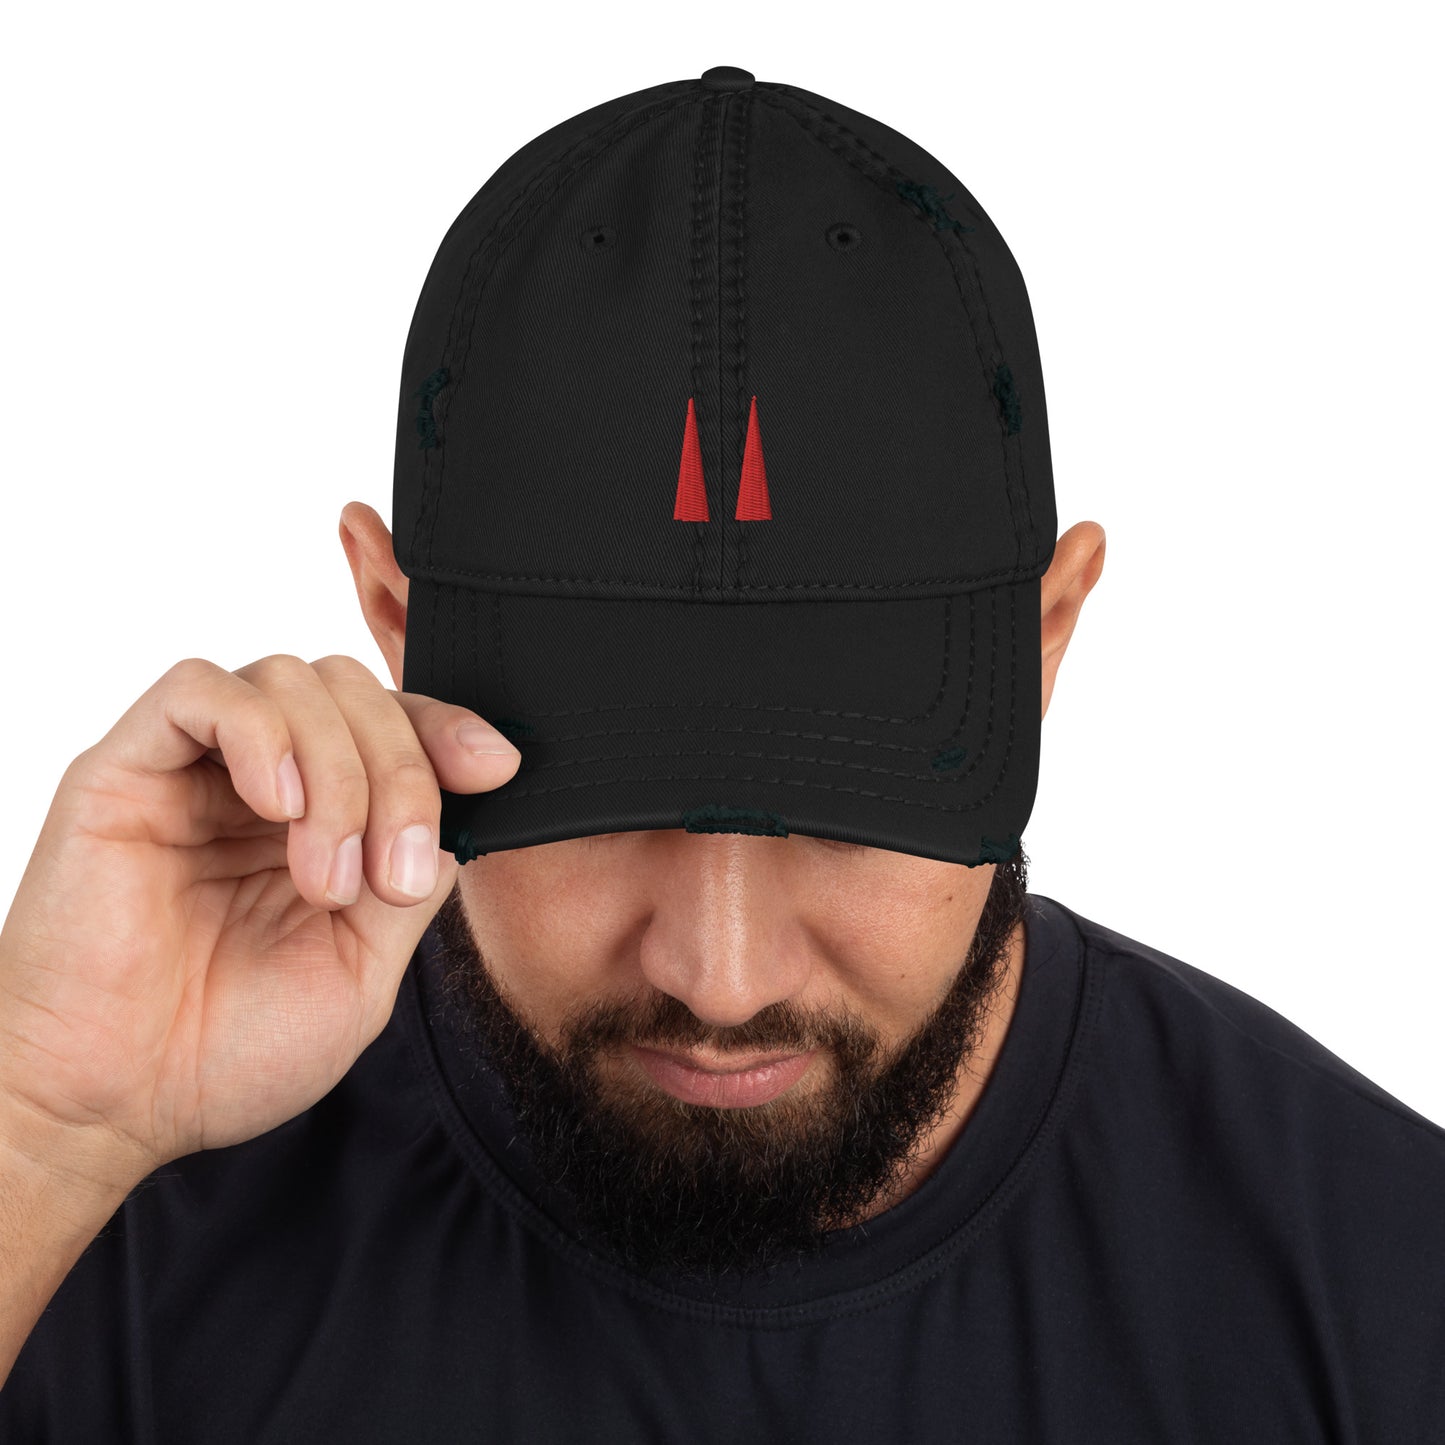 Powers Zero horns Distressed Dad Hat embroidered